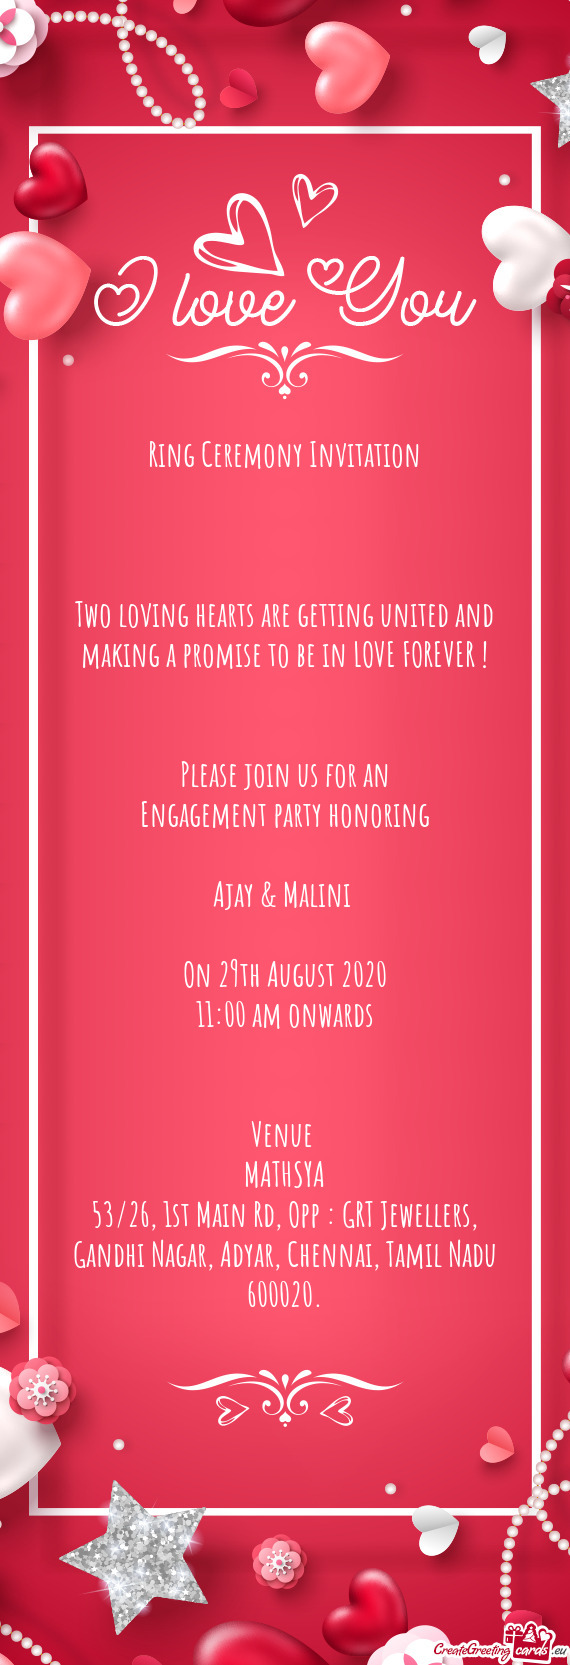 OVE FOREVER !  Please join us for an Engagement party honoring Ajay & Malini  On 29th Aug